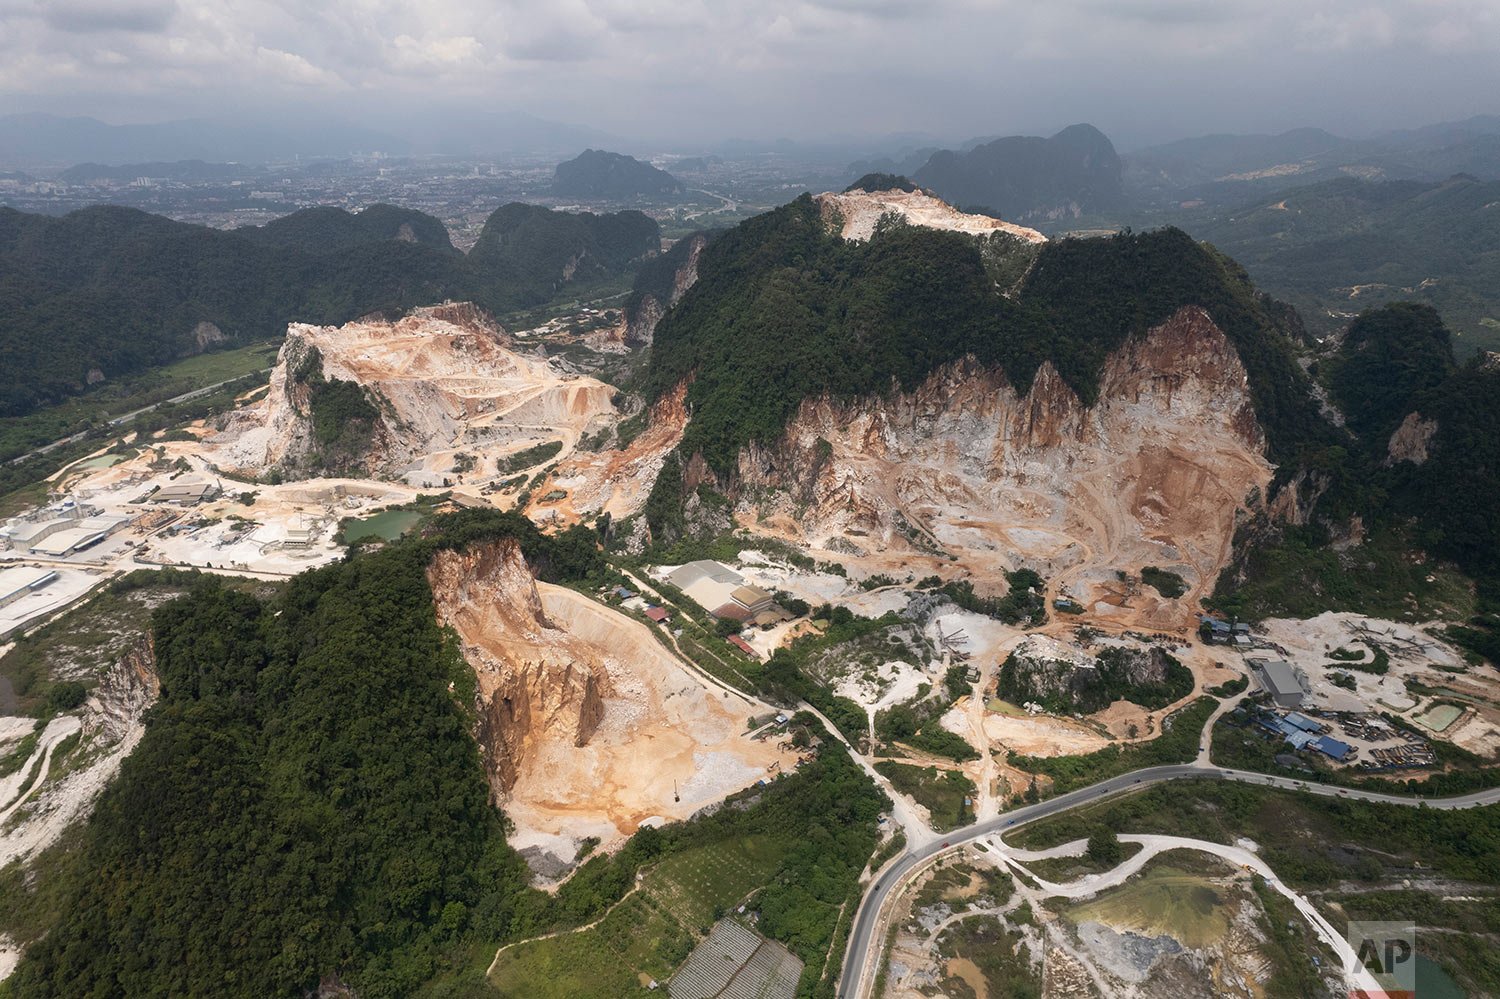  Deforested mountains from massive limestone quarries are seen in Ipoh, Perak state Malaysia, Friday, Nov. 5, 2021.  (AP Photo/Vincent Thian) 